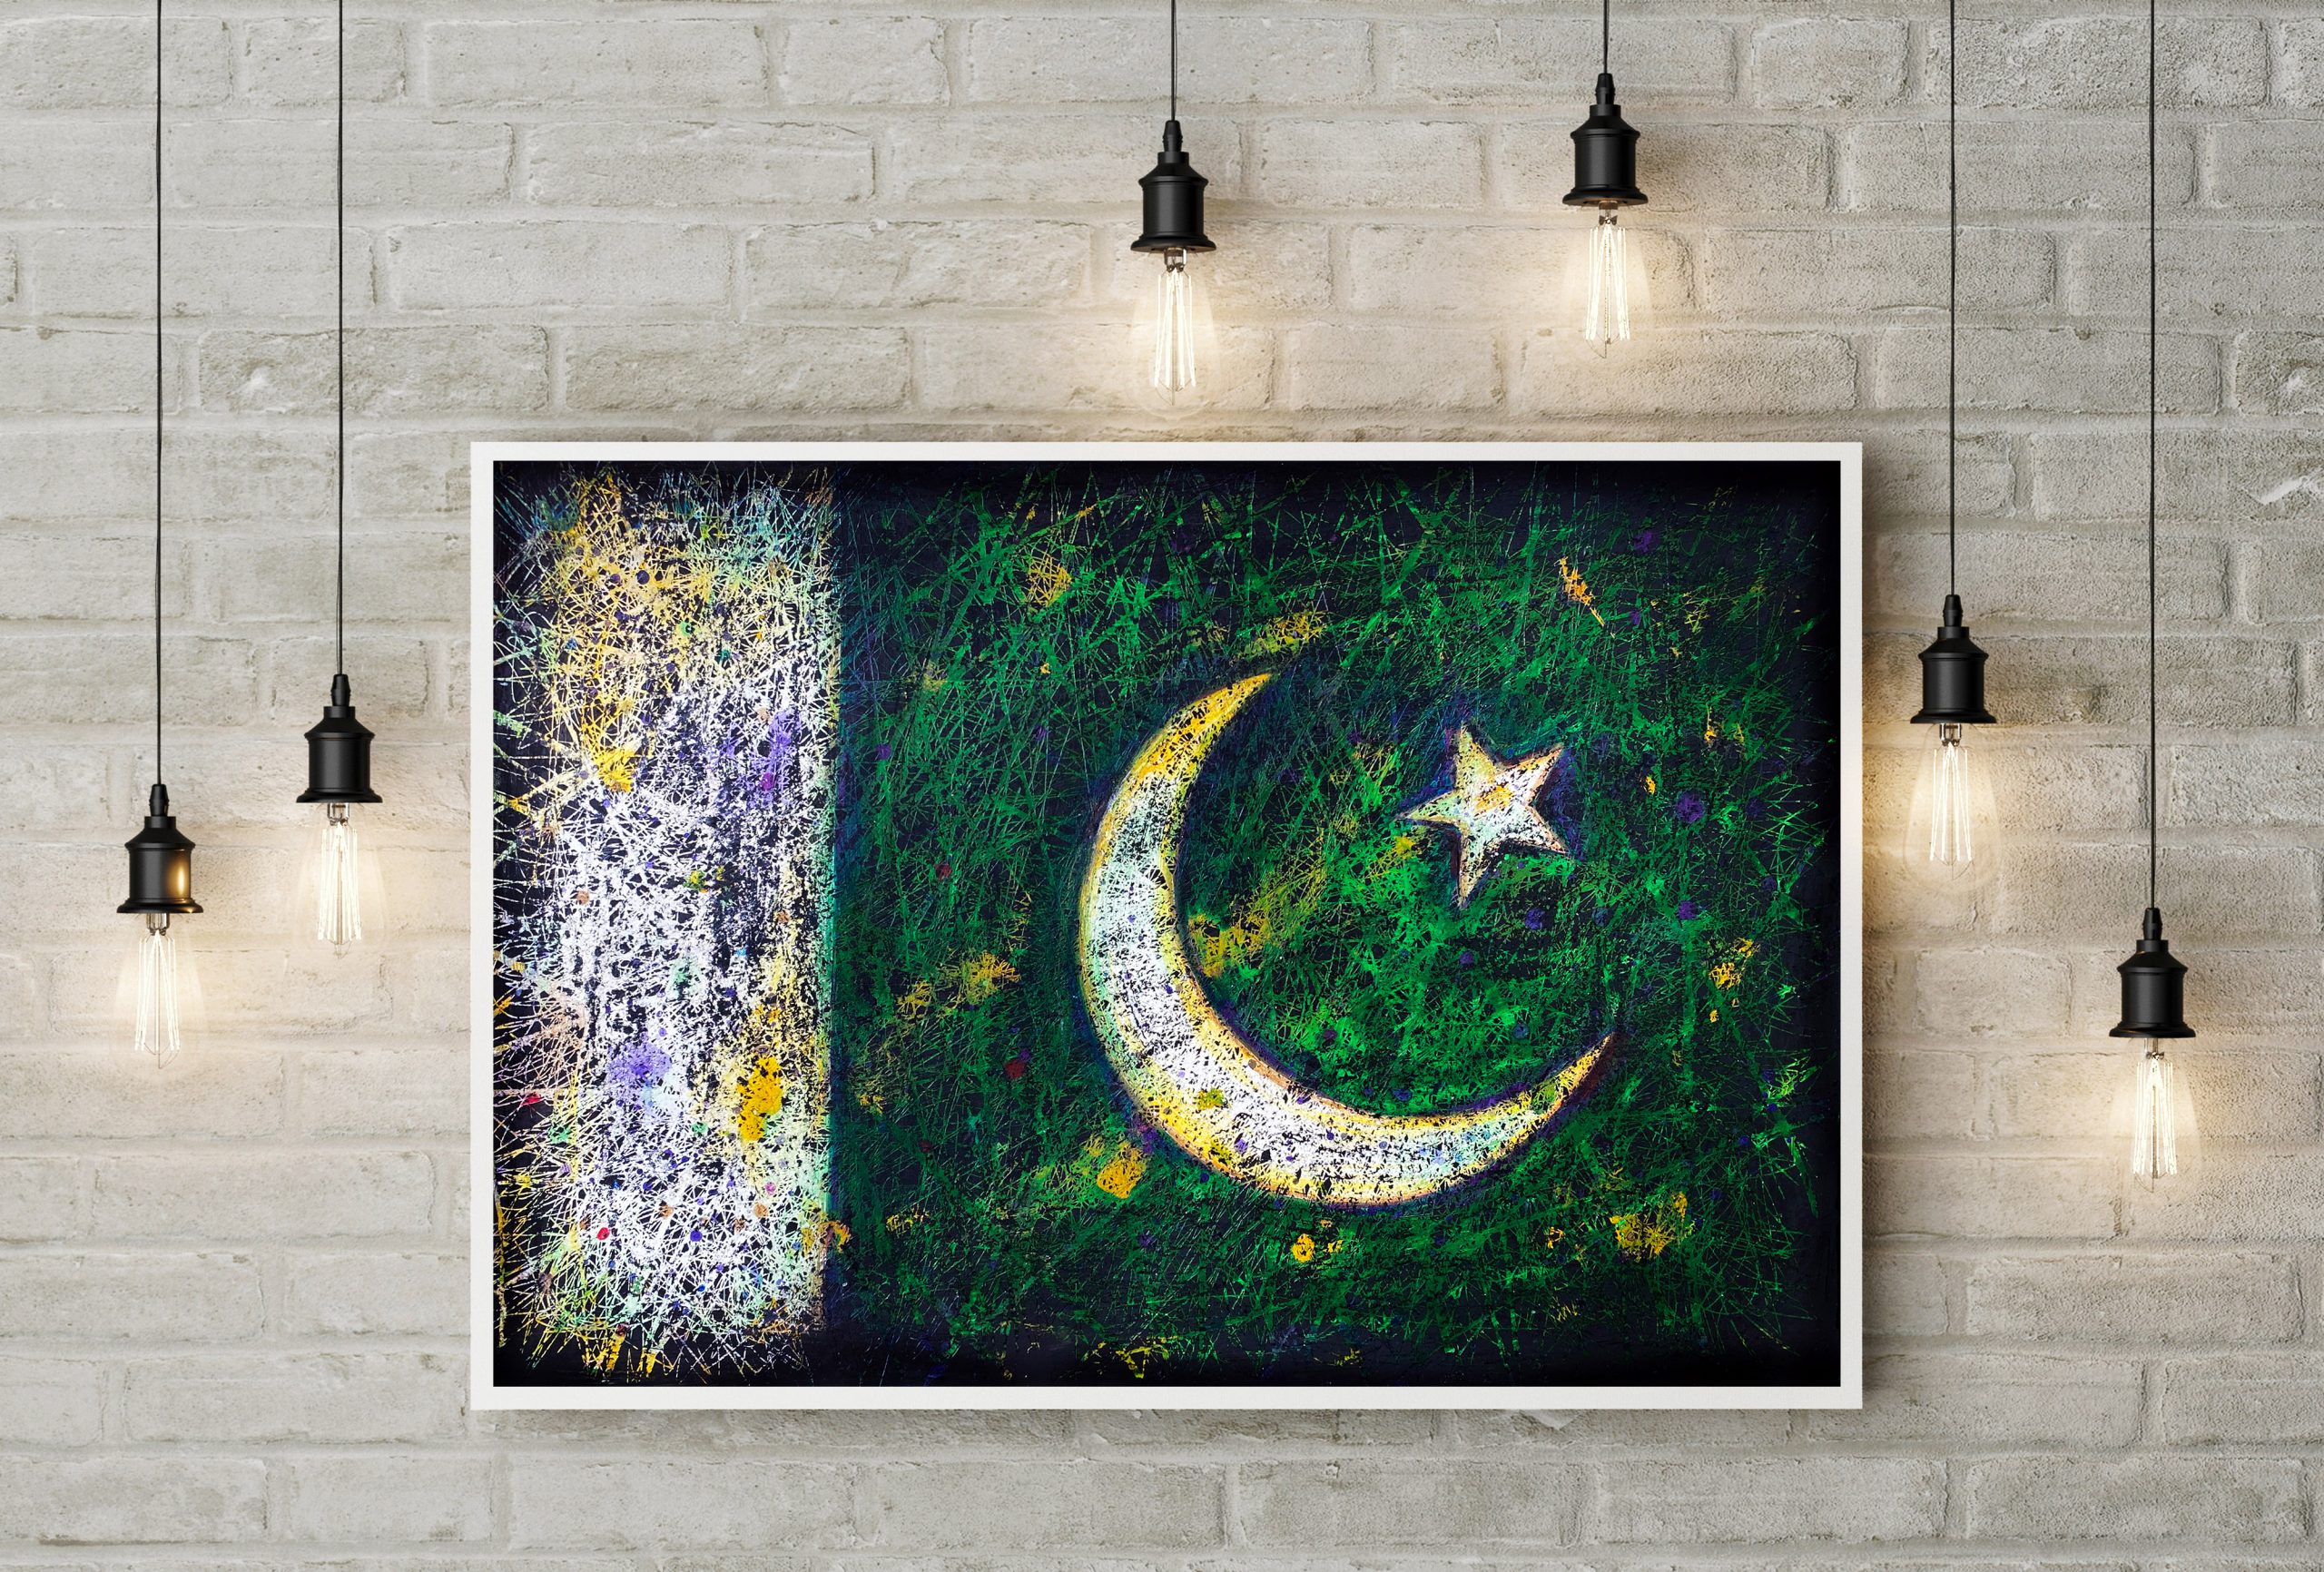 Hand painted Flag of Pakistan